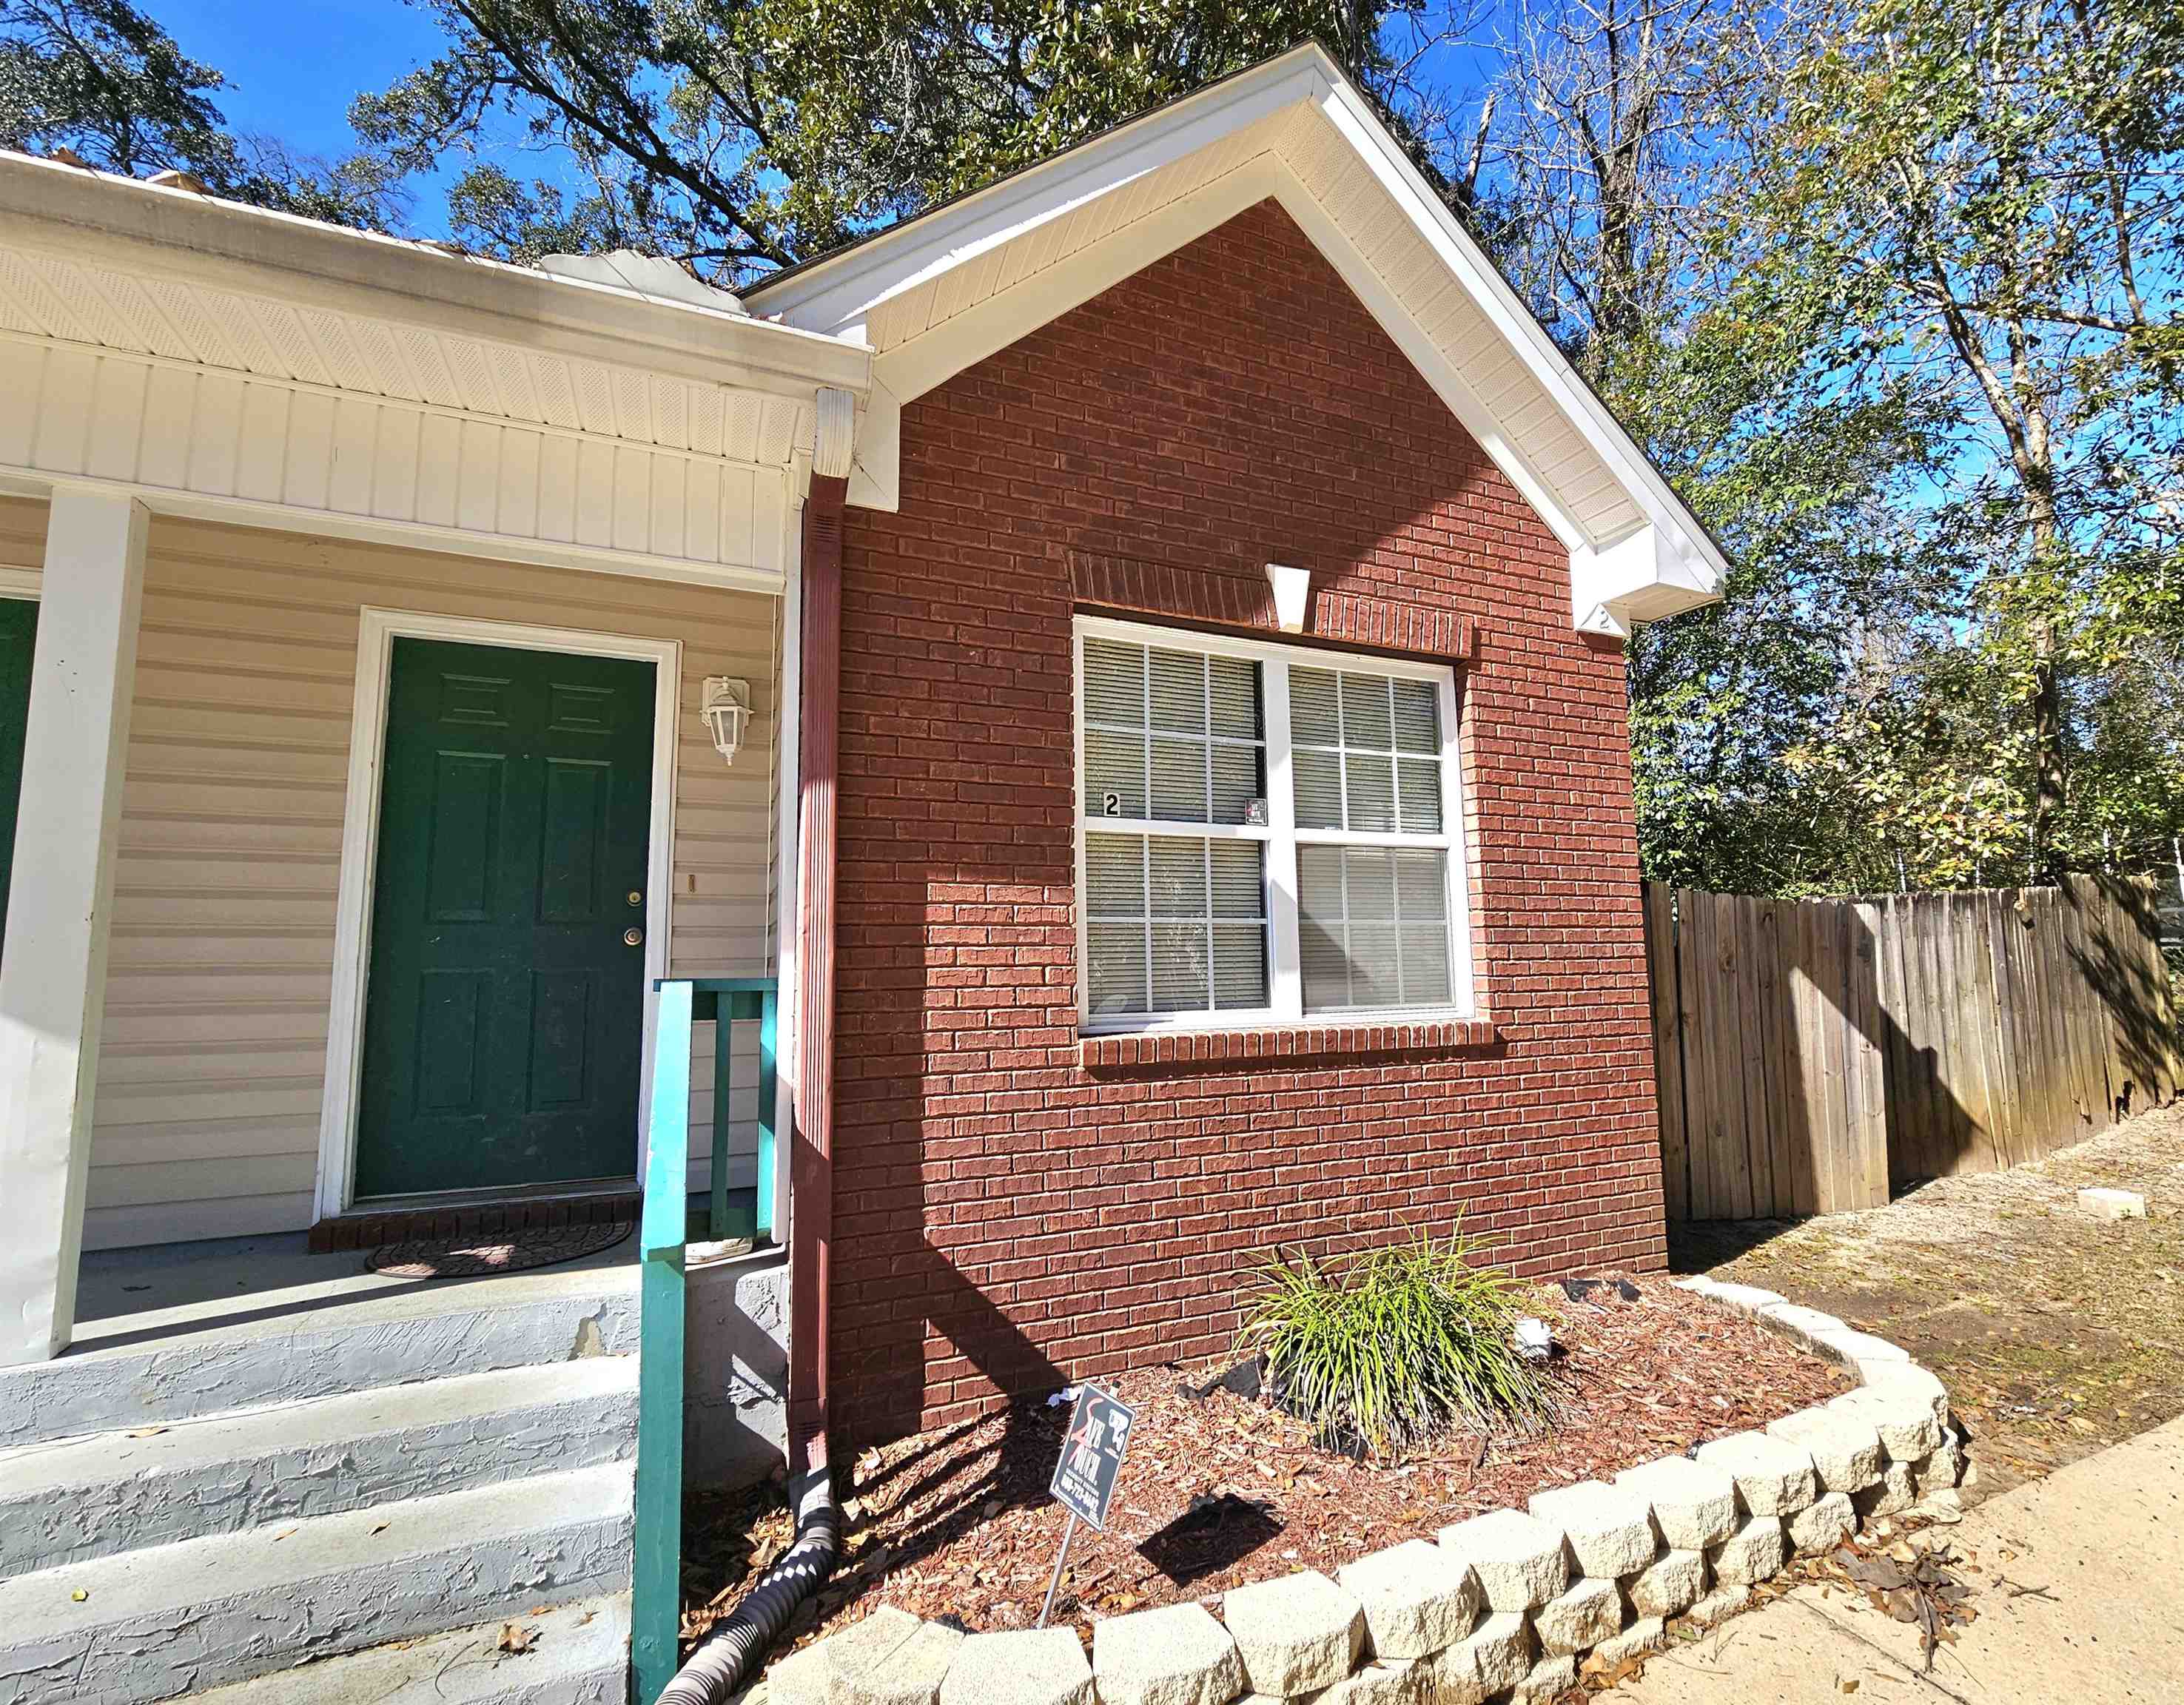 1926 Fannie Drive,TALLAHASSEE,Florida 32303,3 Bedrooms Bedrooms,3 BathroomsBathrooms,Townhouse,1926 Fannie Drive,367968